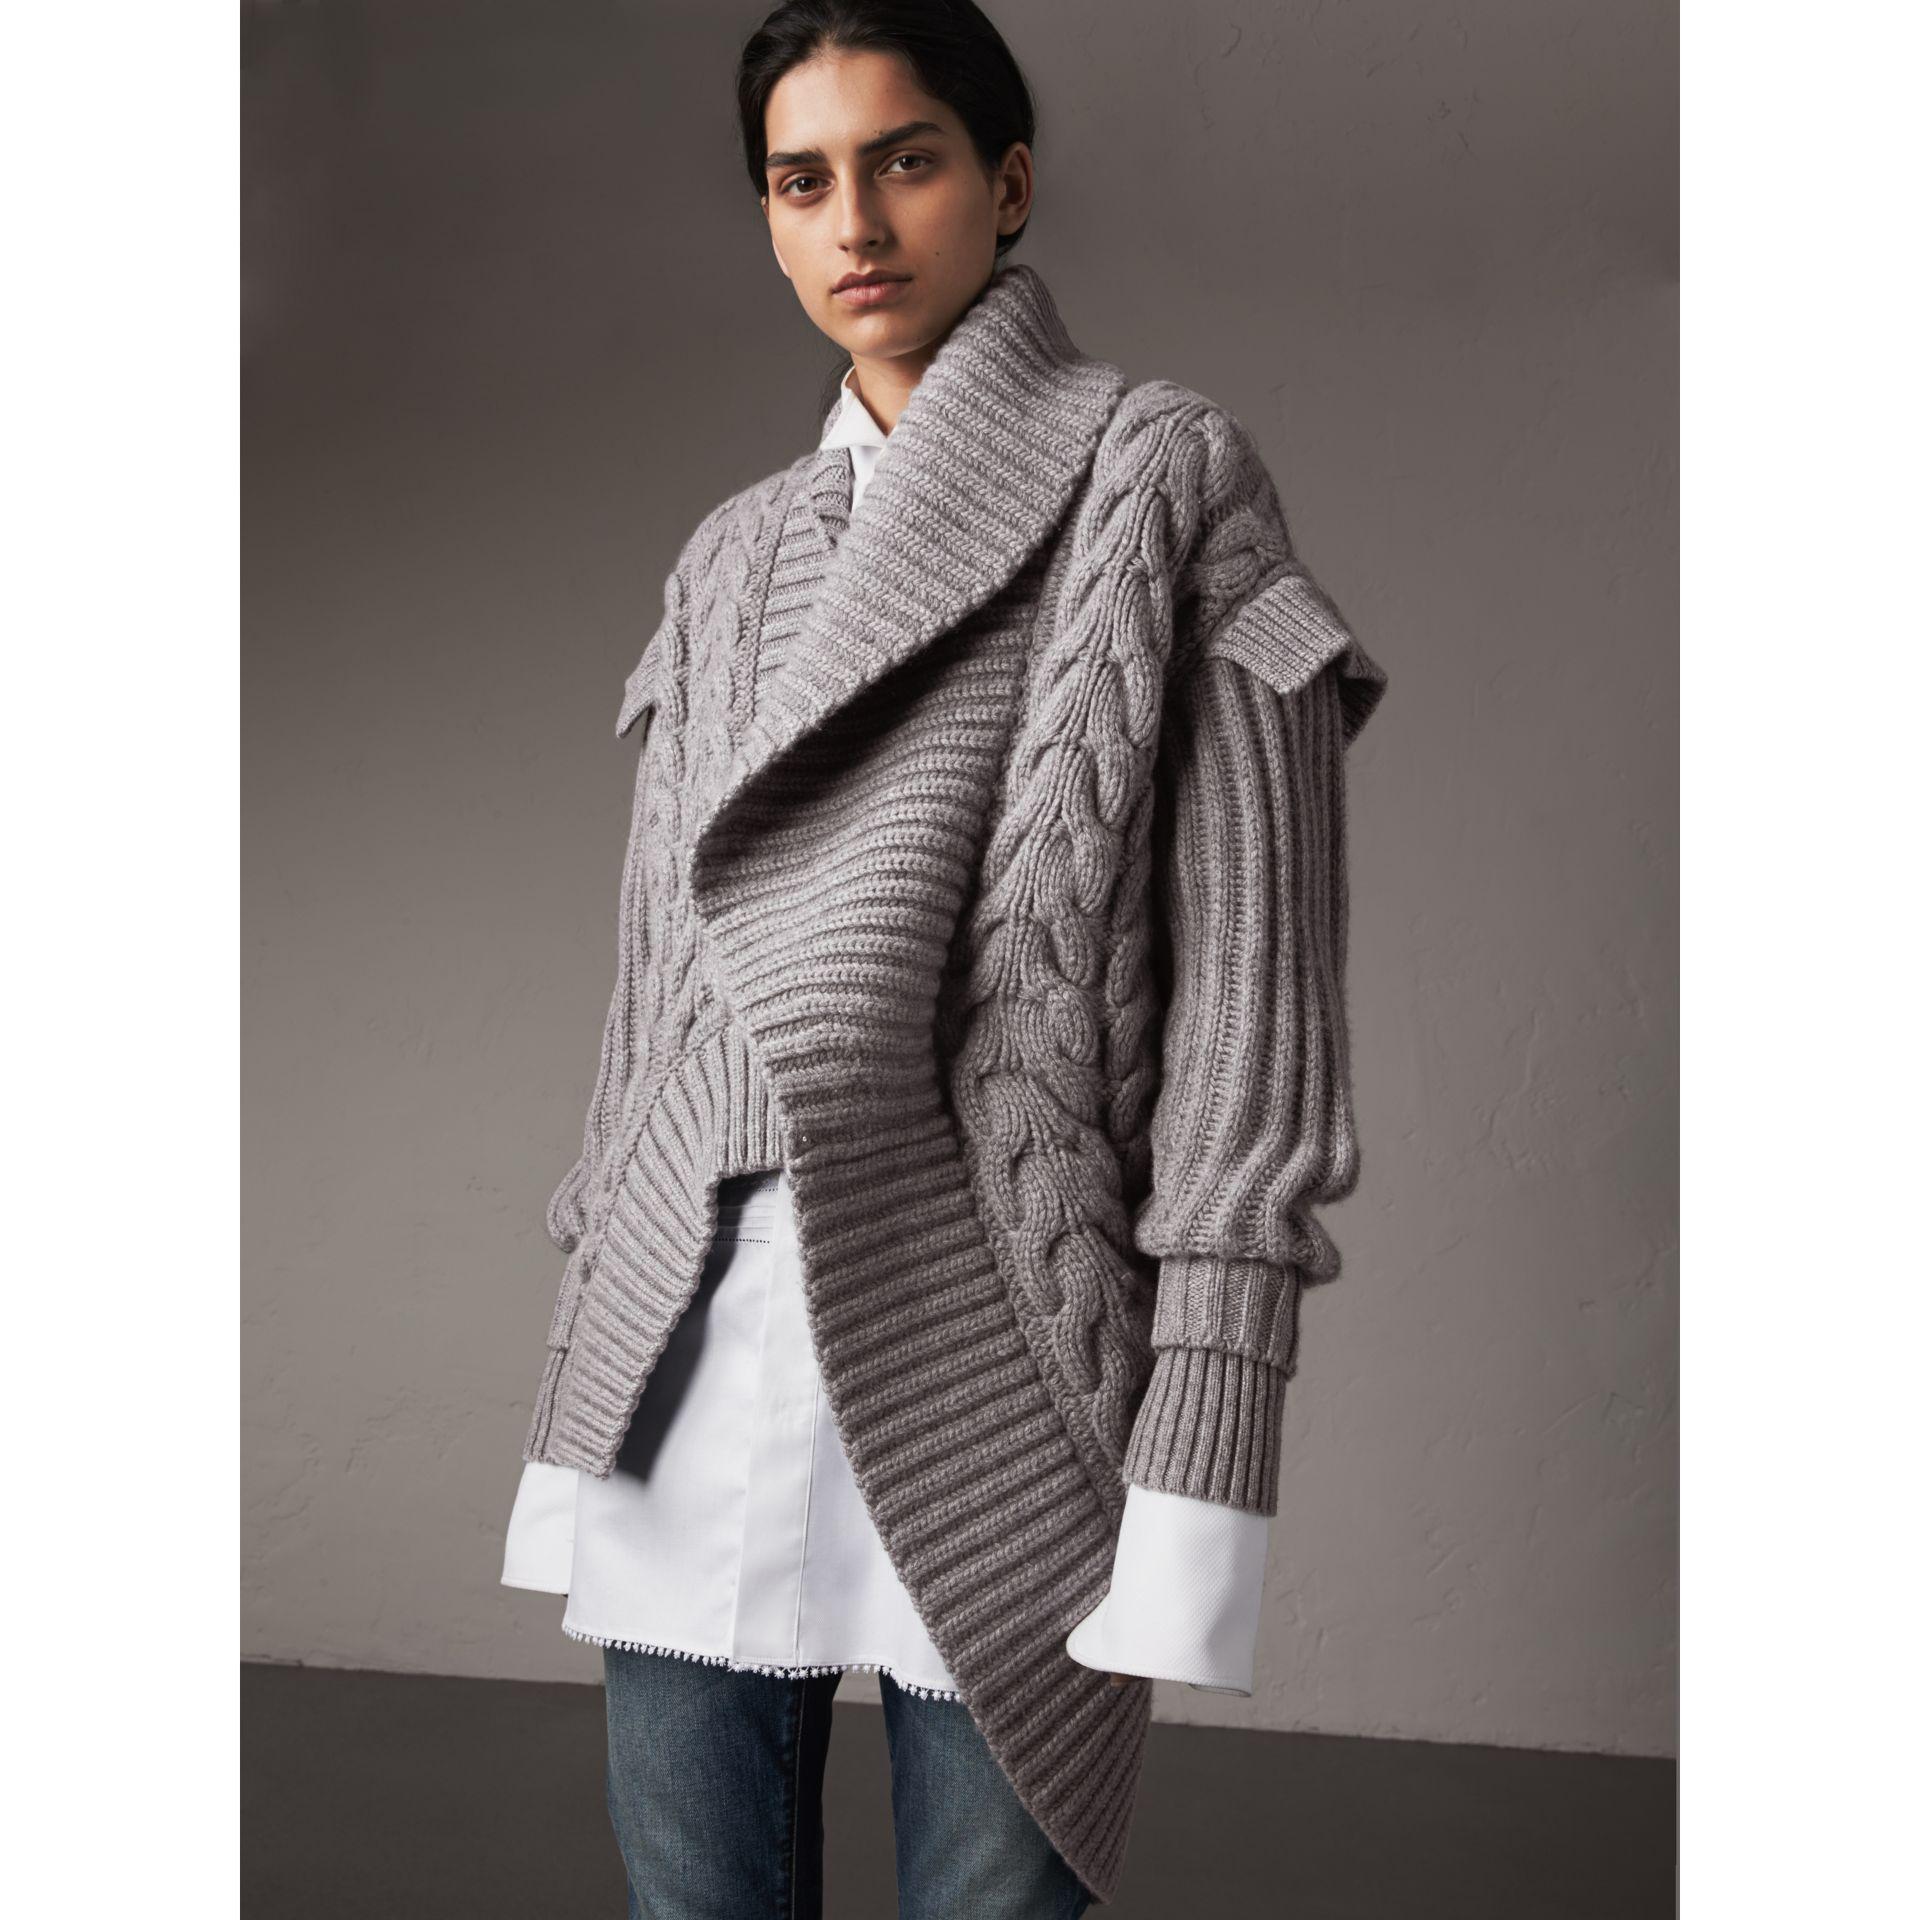 Burberry Cable Knit Cashmere Asymmetric Cardigan in Grey Melange (Gray ...